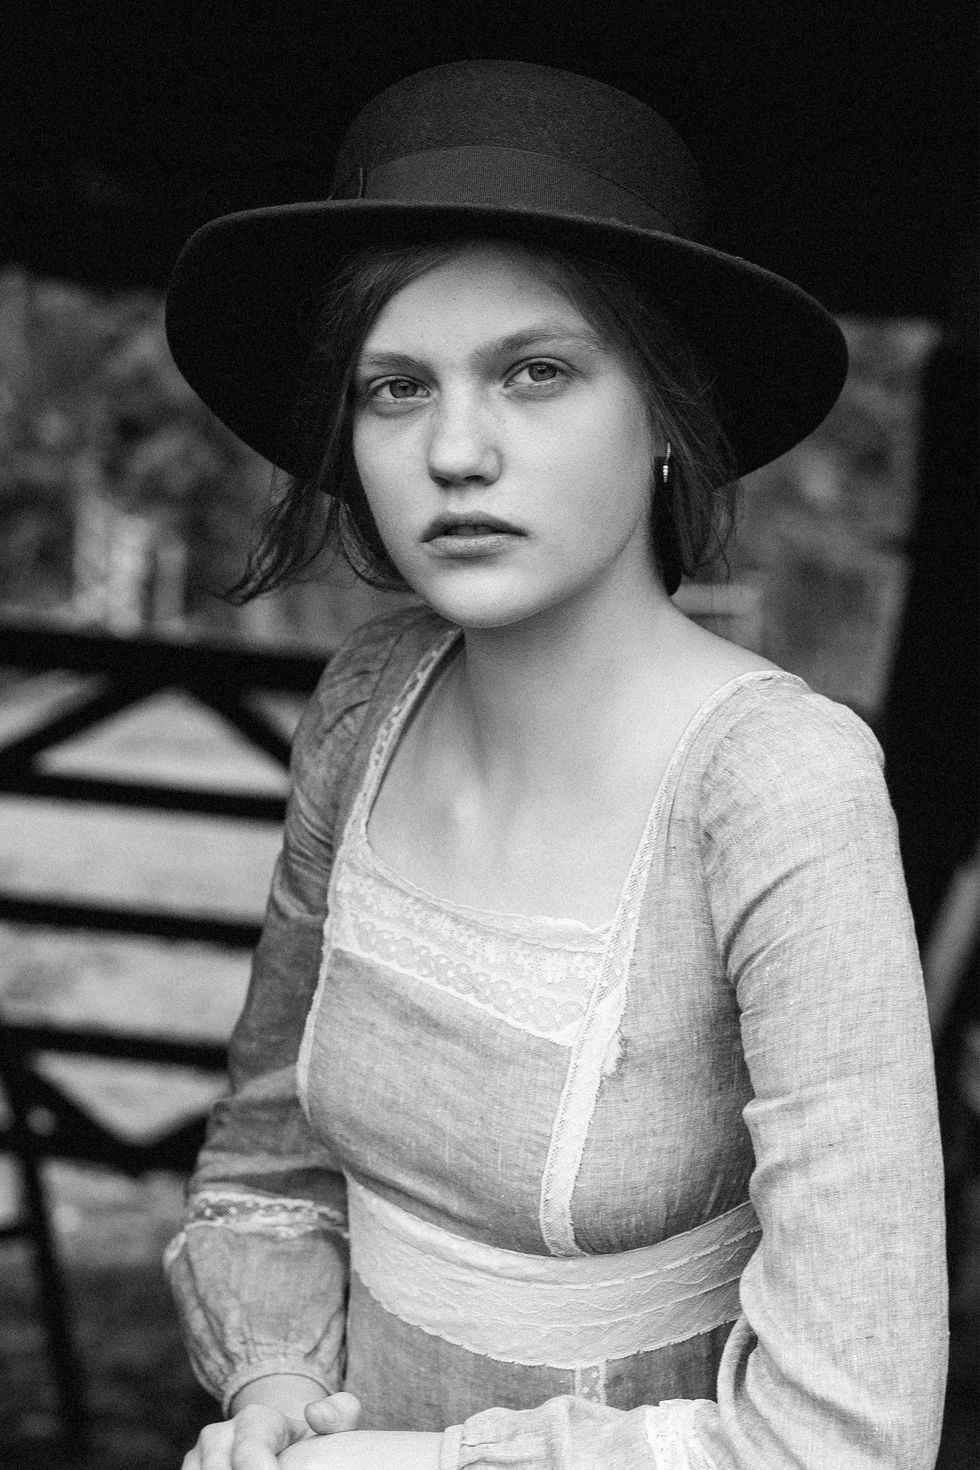 Face, White, Photograph, Black, Beauty, Black-and-white, Lip, Monochrome photography, Skin, Hat, 